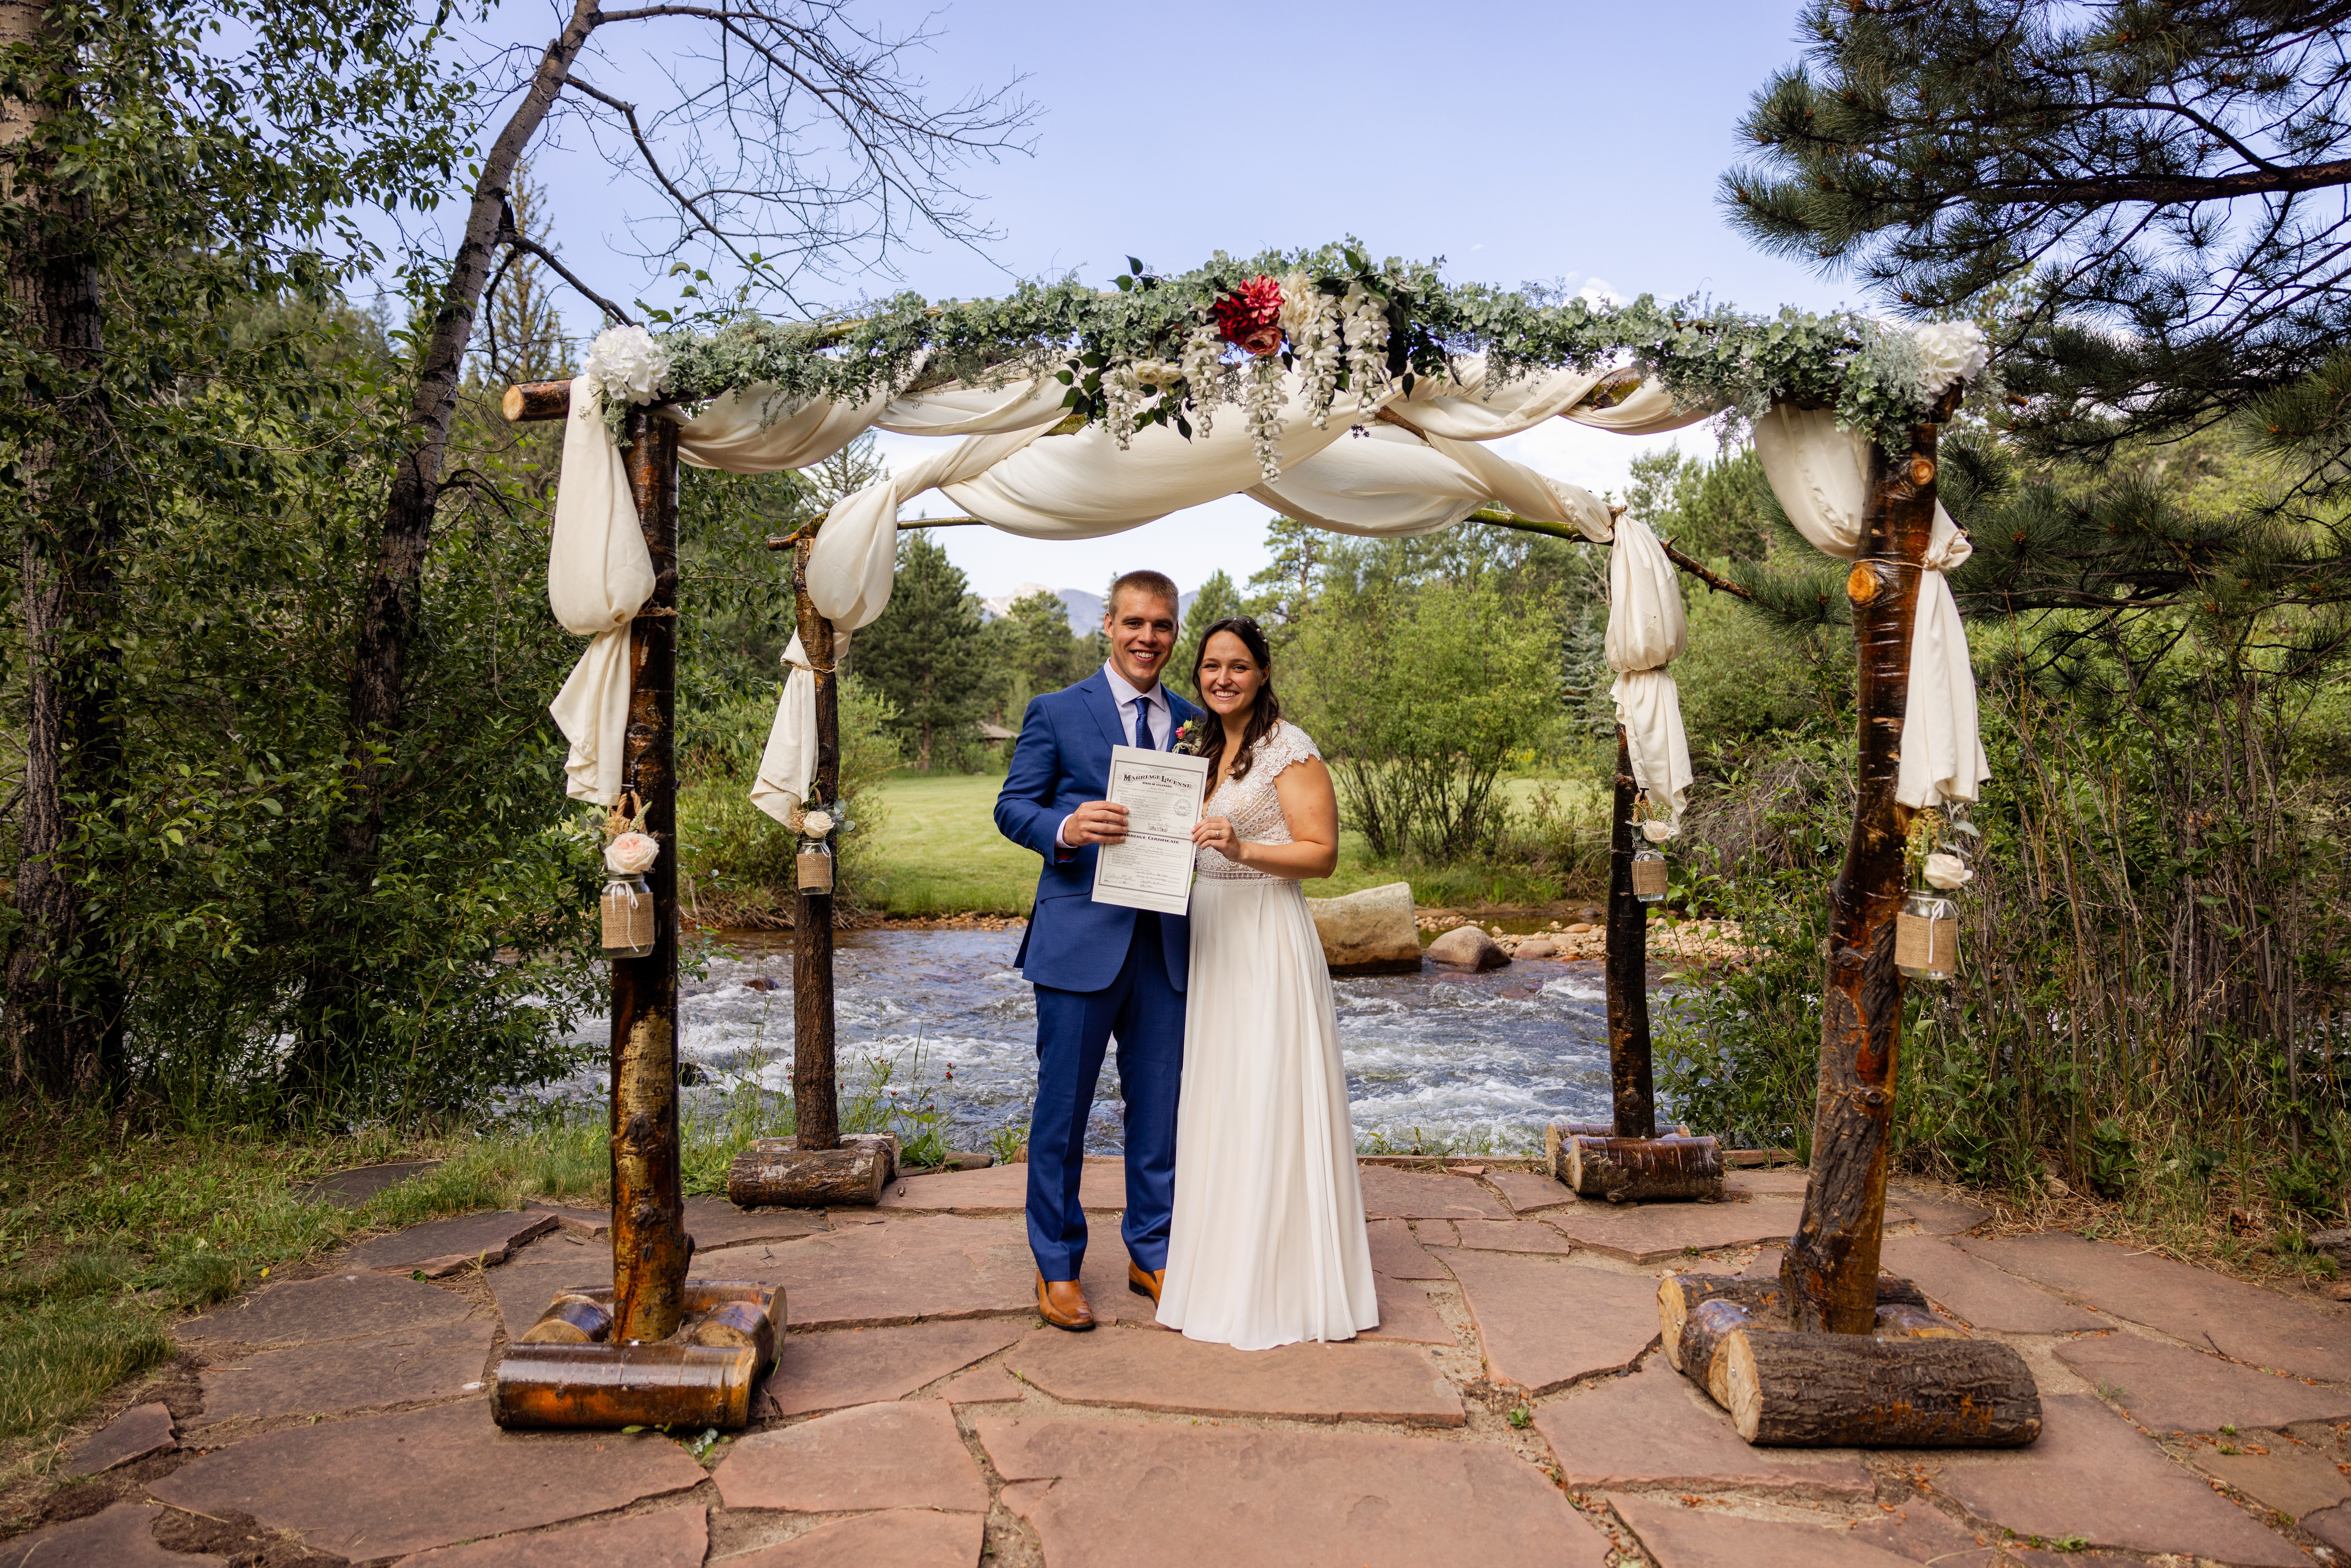 The bride and groom holding their marriage license at Romantic RiverSong Inn in Estes Park. 